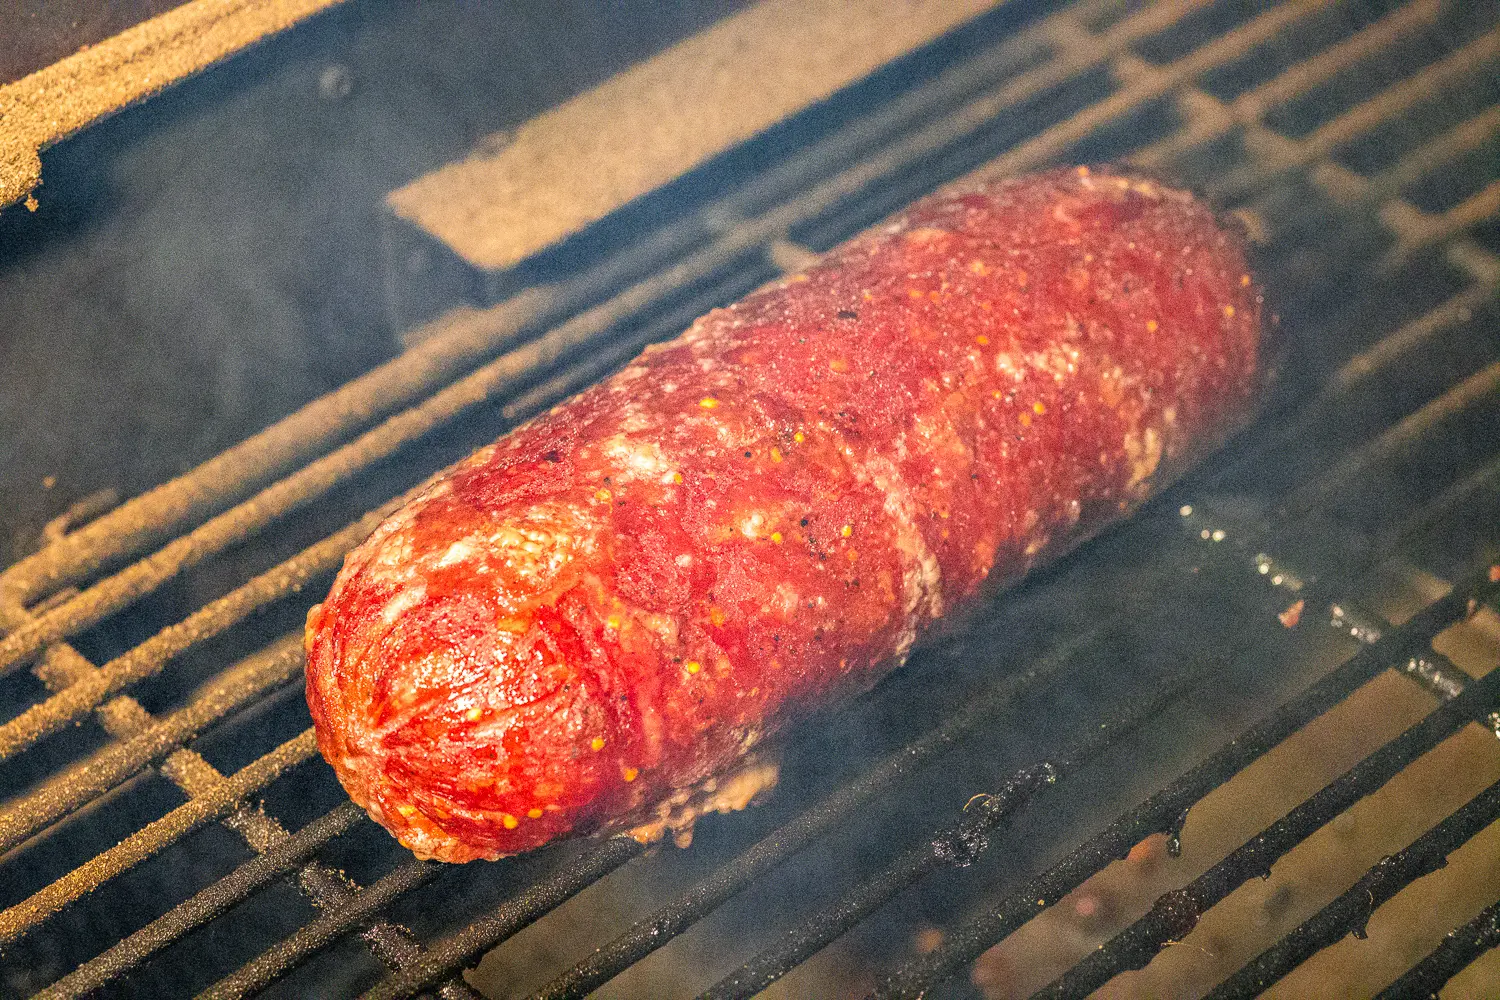 smoked summer sausage recipe - What kind of wood do you use to smoke summer sausage